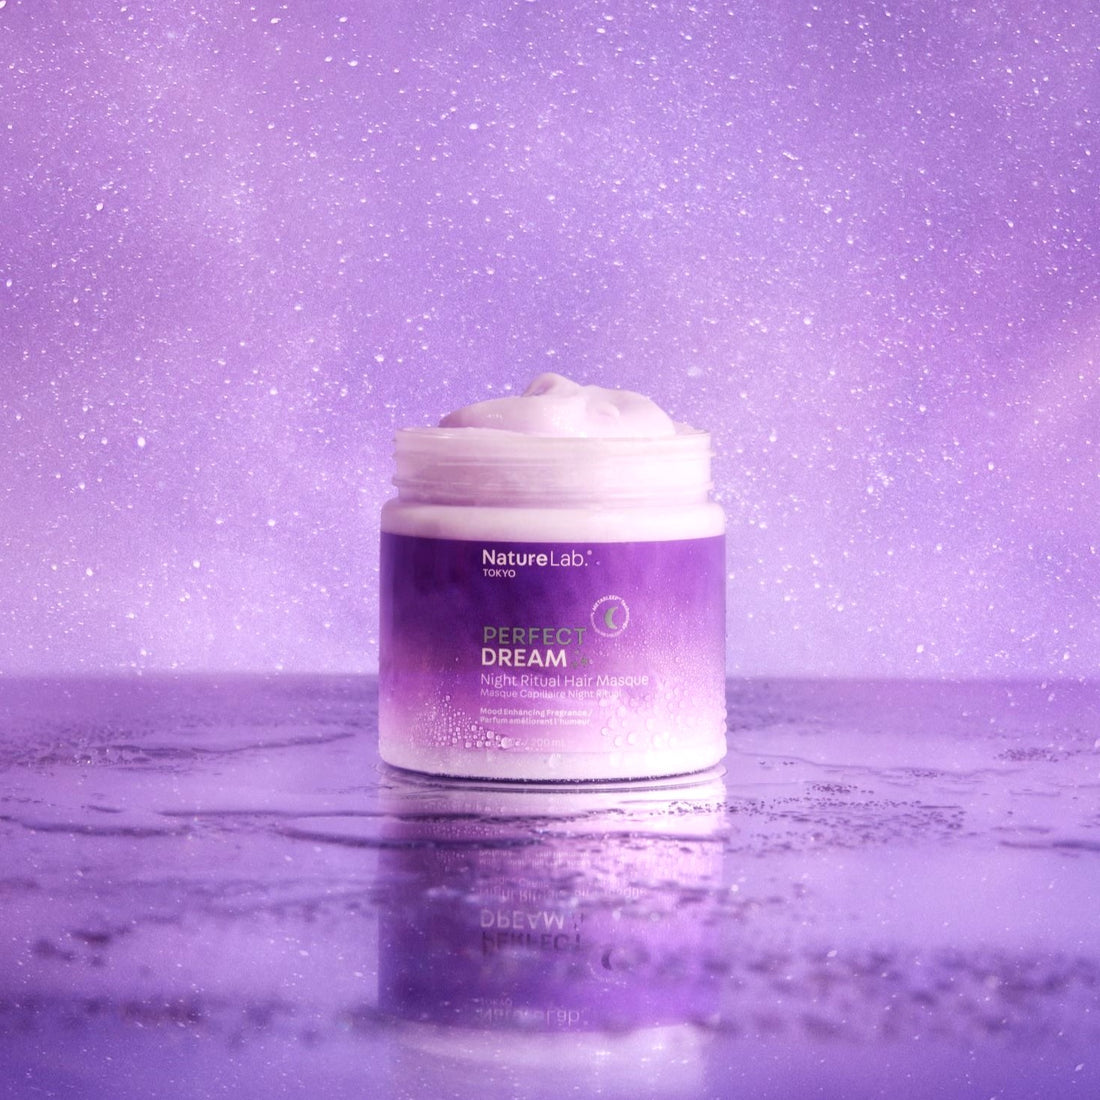 The Perfect Dream Nigh Ritual Hair Masque on a slightly reflective surface in front of a purple starry background. The jar of the masque is open to reveal the creamy, luxurious texture inside. The whole photo is cast in a purple glow.